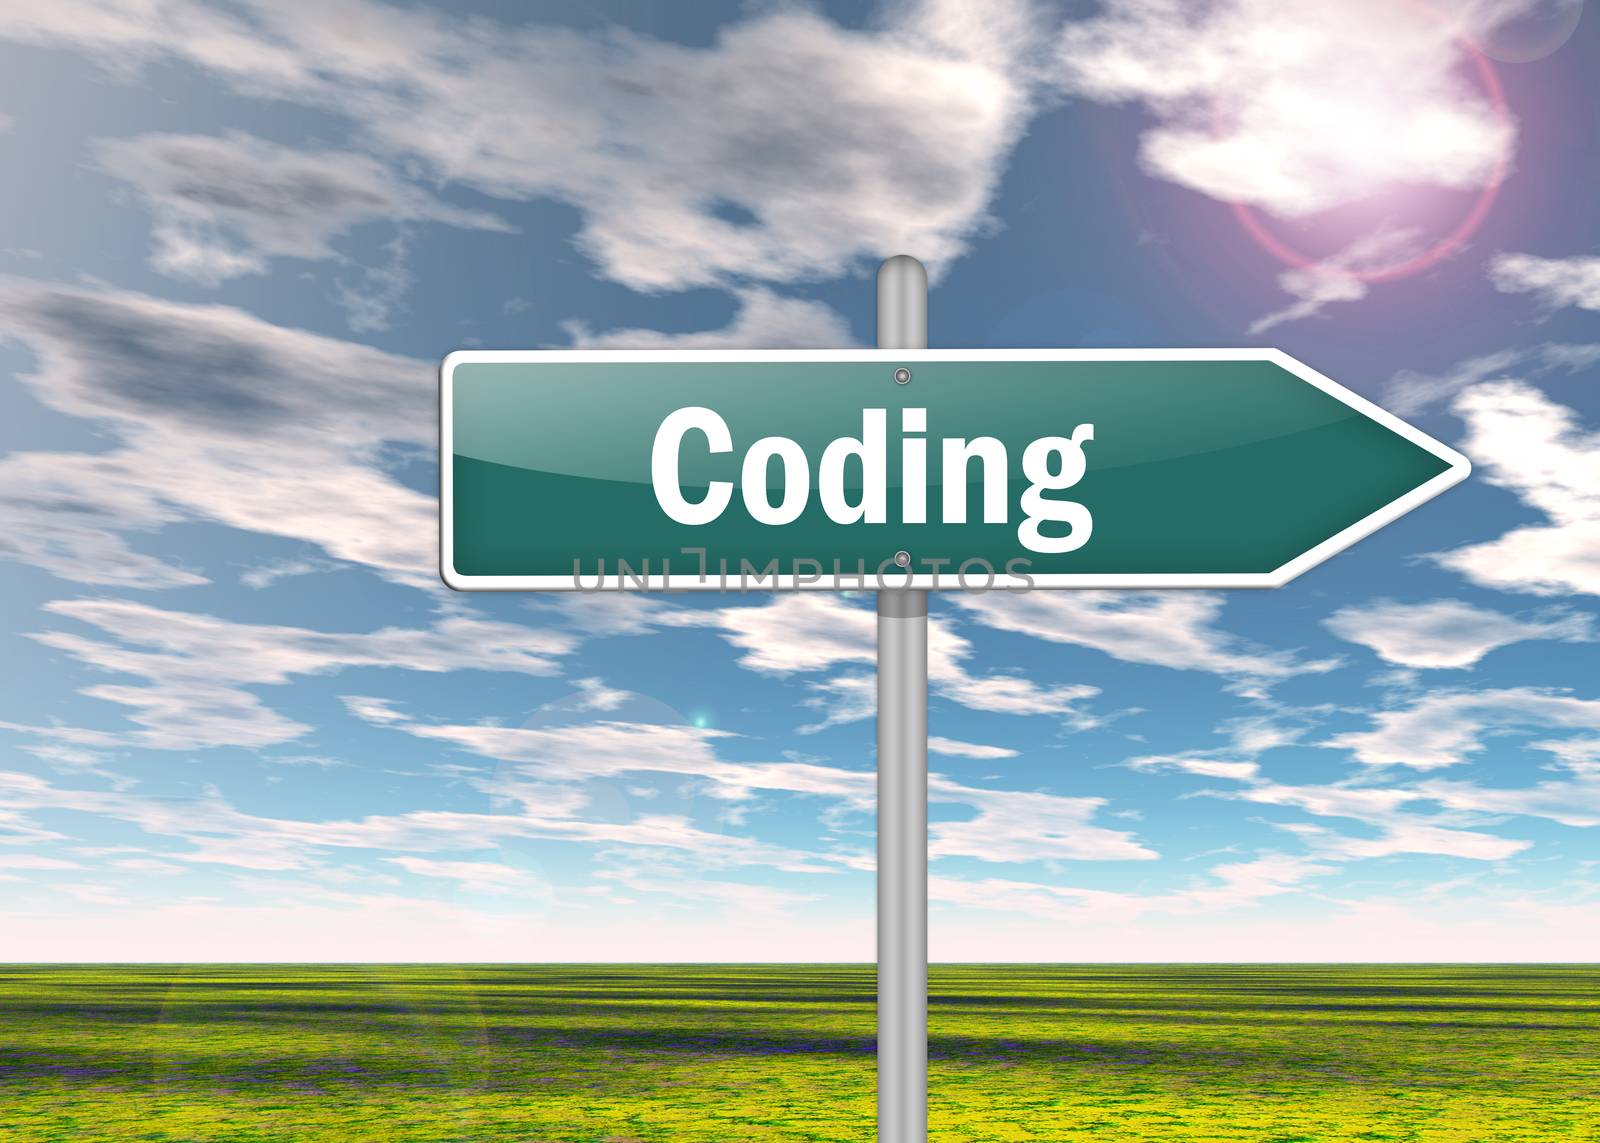 Signpost with Coding wording